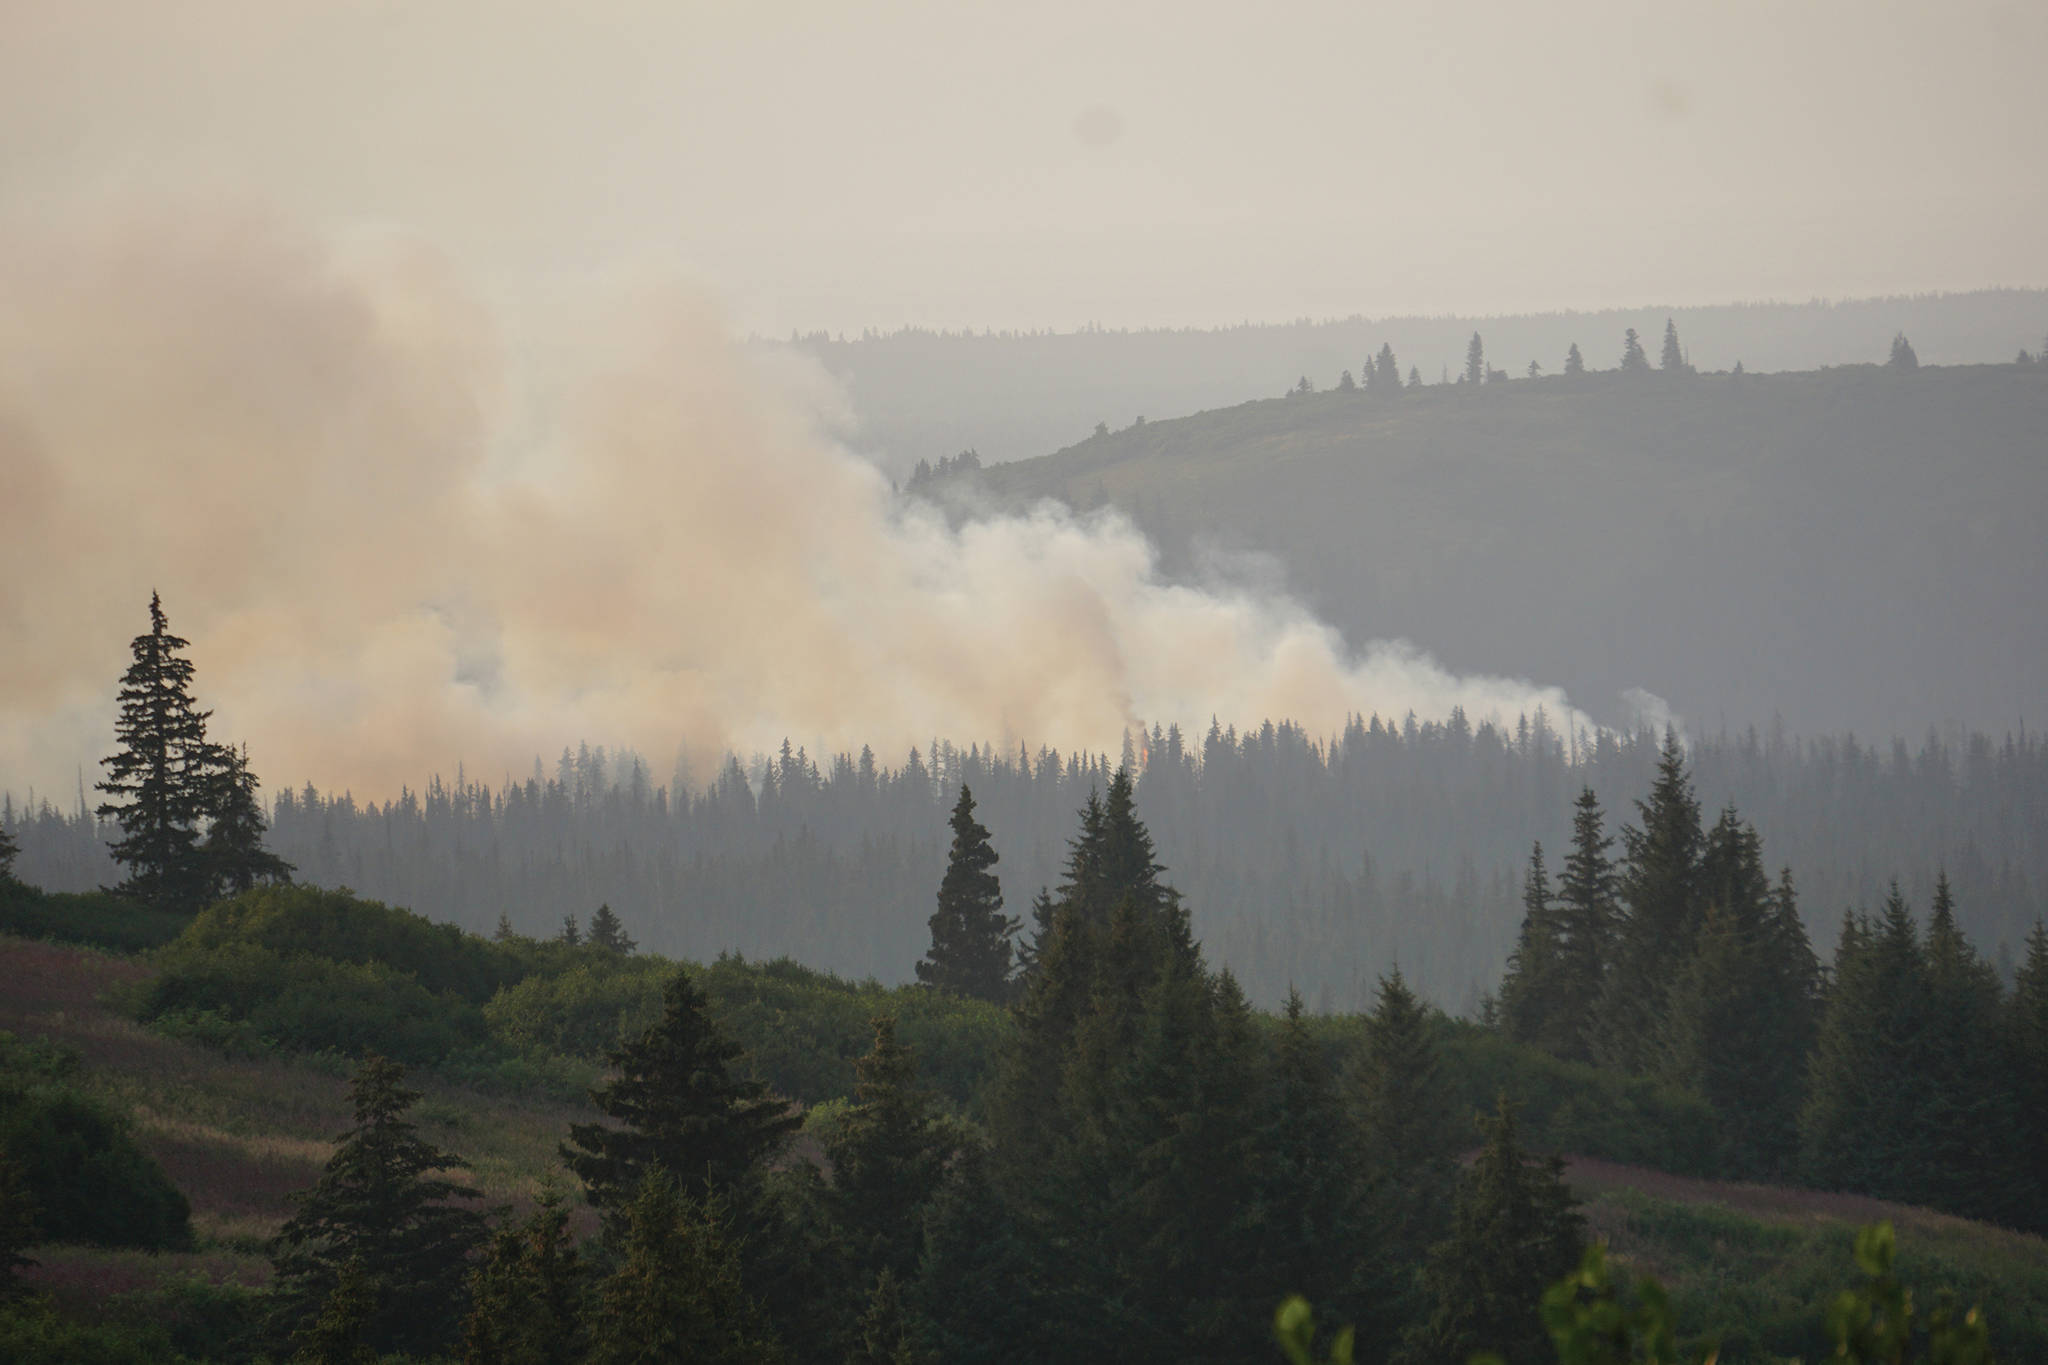 A spruce tree flares up in the North Fork fire as it burns near the south end of the North Fork Road on Sunday evening, Aug. 18, 2019, near Homer, Alaska. (Photo by Michael Armstrong/Homer News)